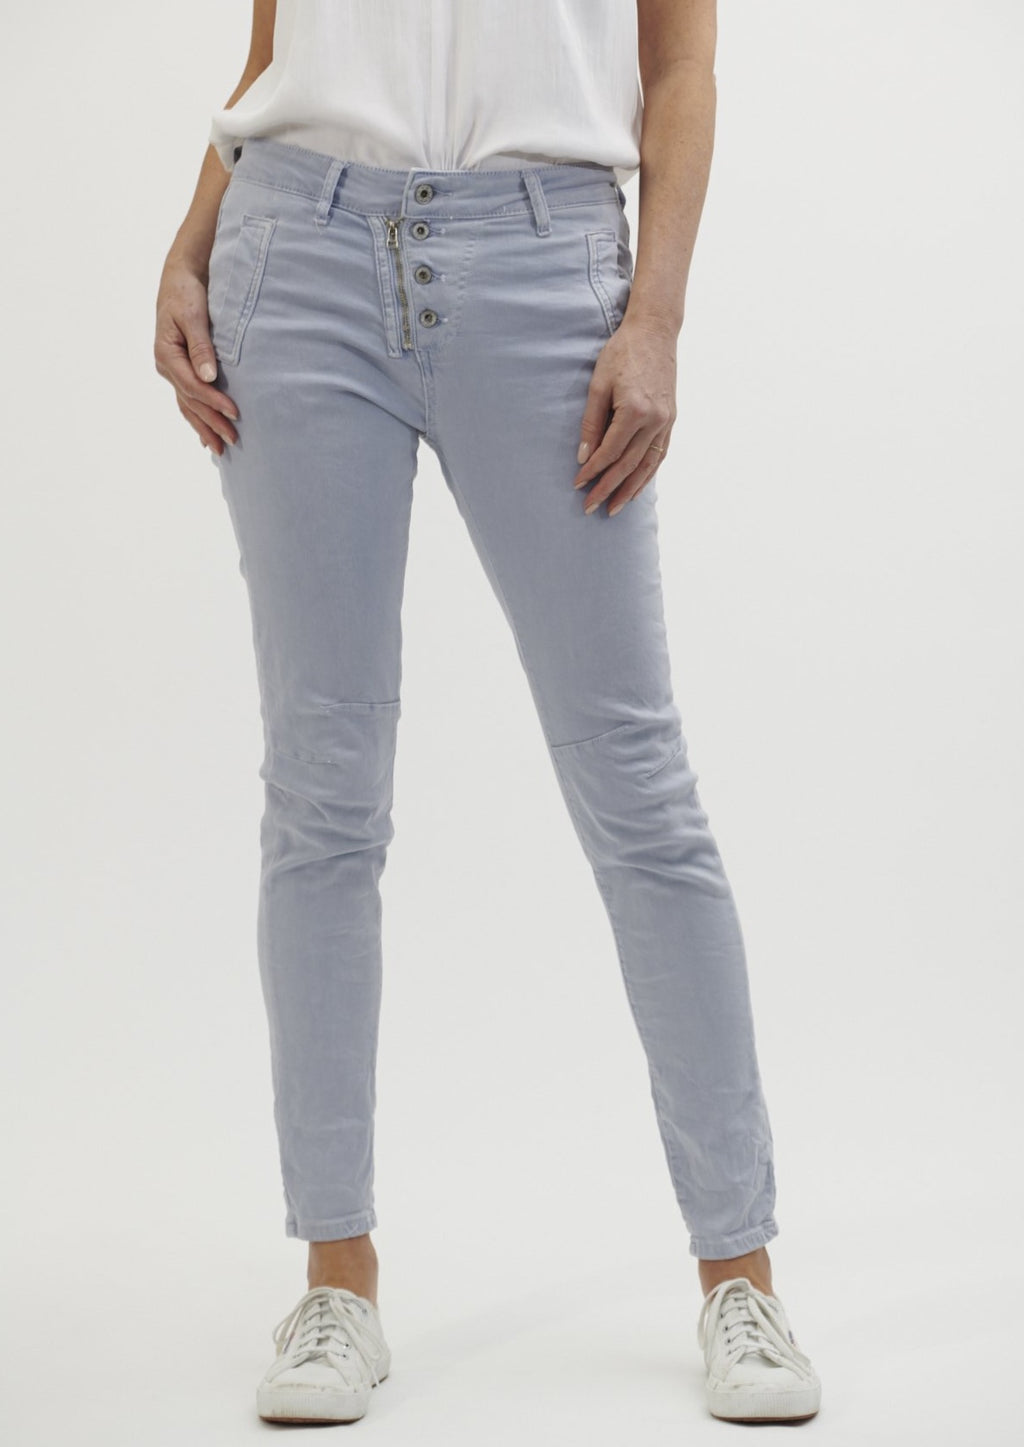 Italian Star Buttons Jeans - Ice Blue  You'll love these Italian star button jeans for their versatility, style and comfort   Your favourite everyday jean that can be dressed up or down.  Features:   Mid-rise Slim leg Zip and button fly  Side pockets Zip back pockets Seam detail at knee Designed to fade